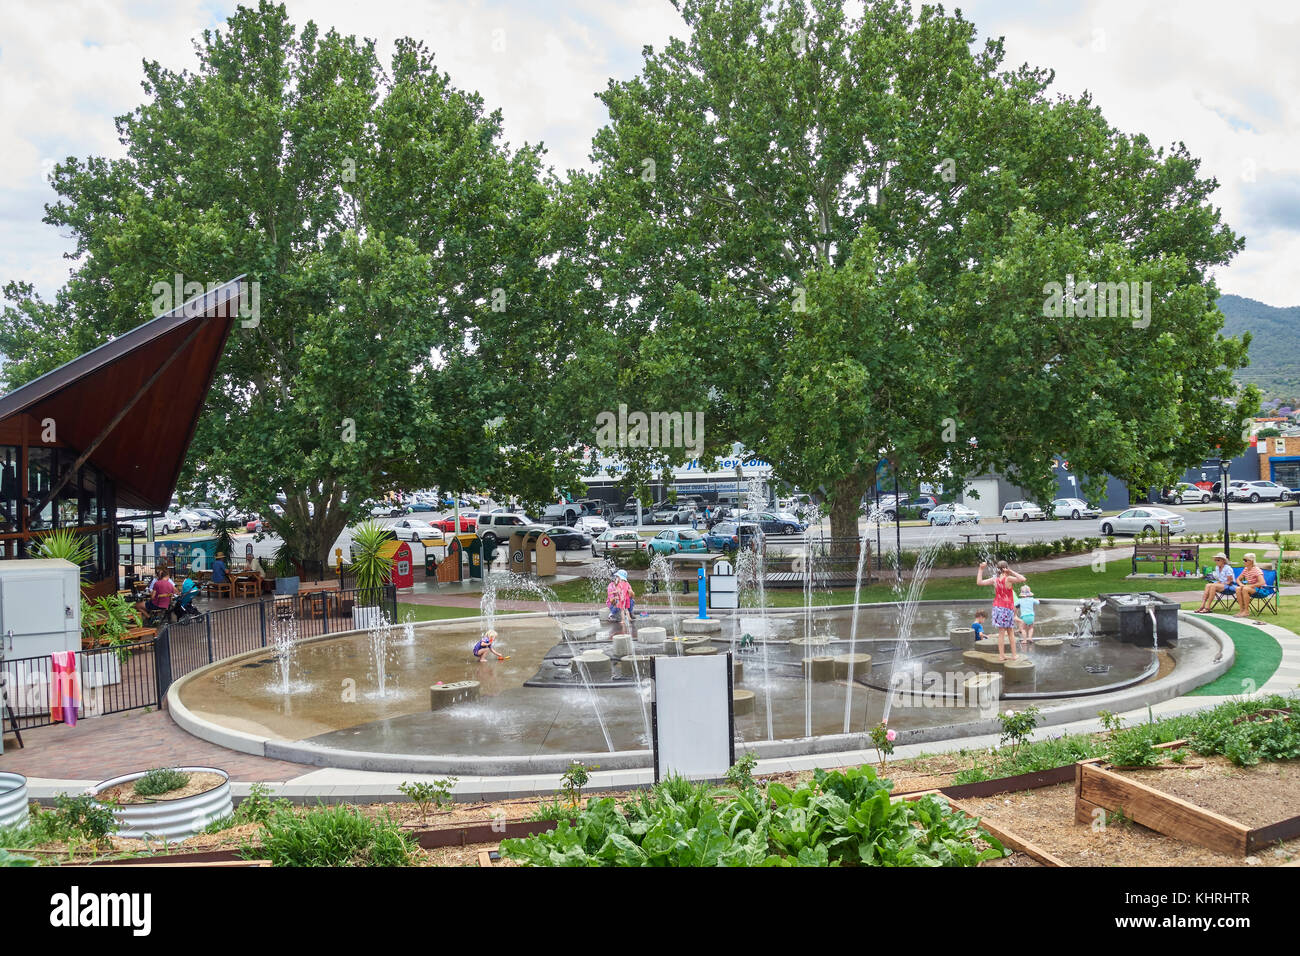 Children's splash pad with kitchen garden in foreground and London Plane trees for shade. Tamworth NSW Australia. Stock Photo